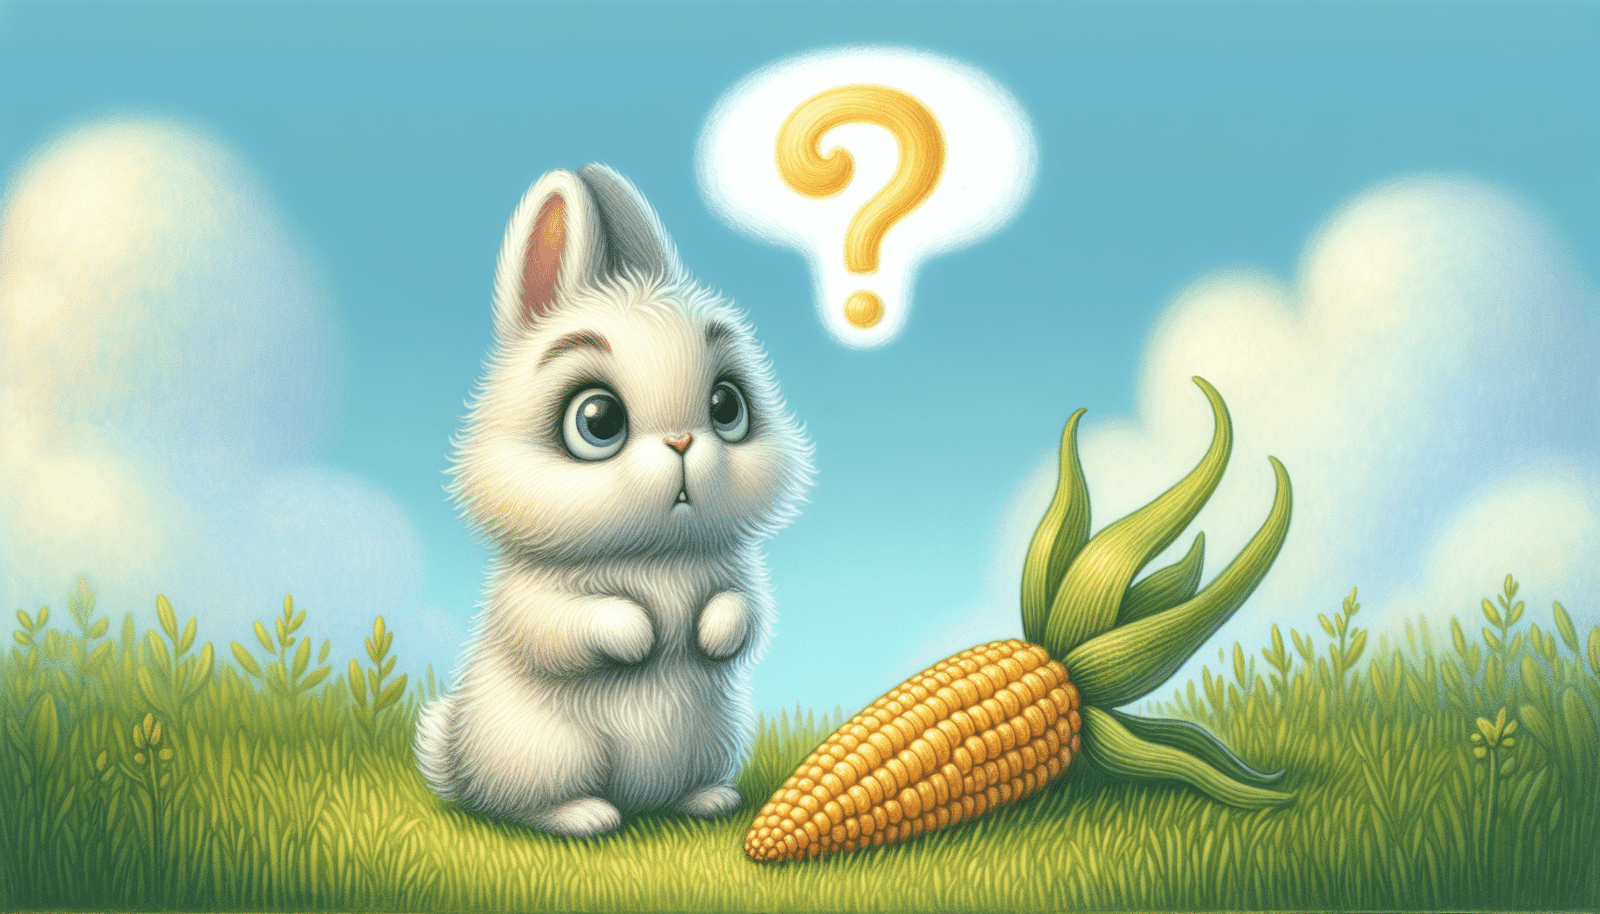 Illustration of a rabbit with a question mark over a corn cob